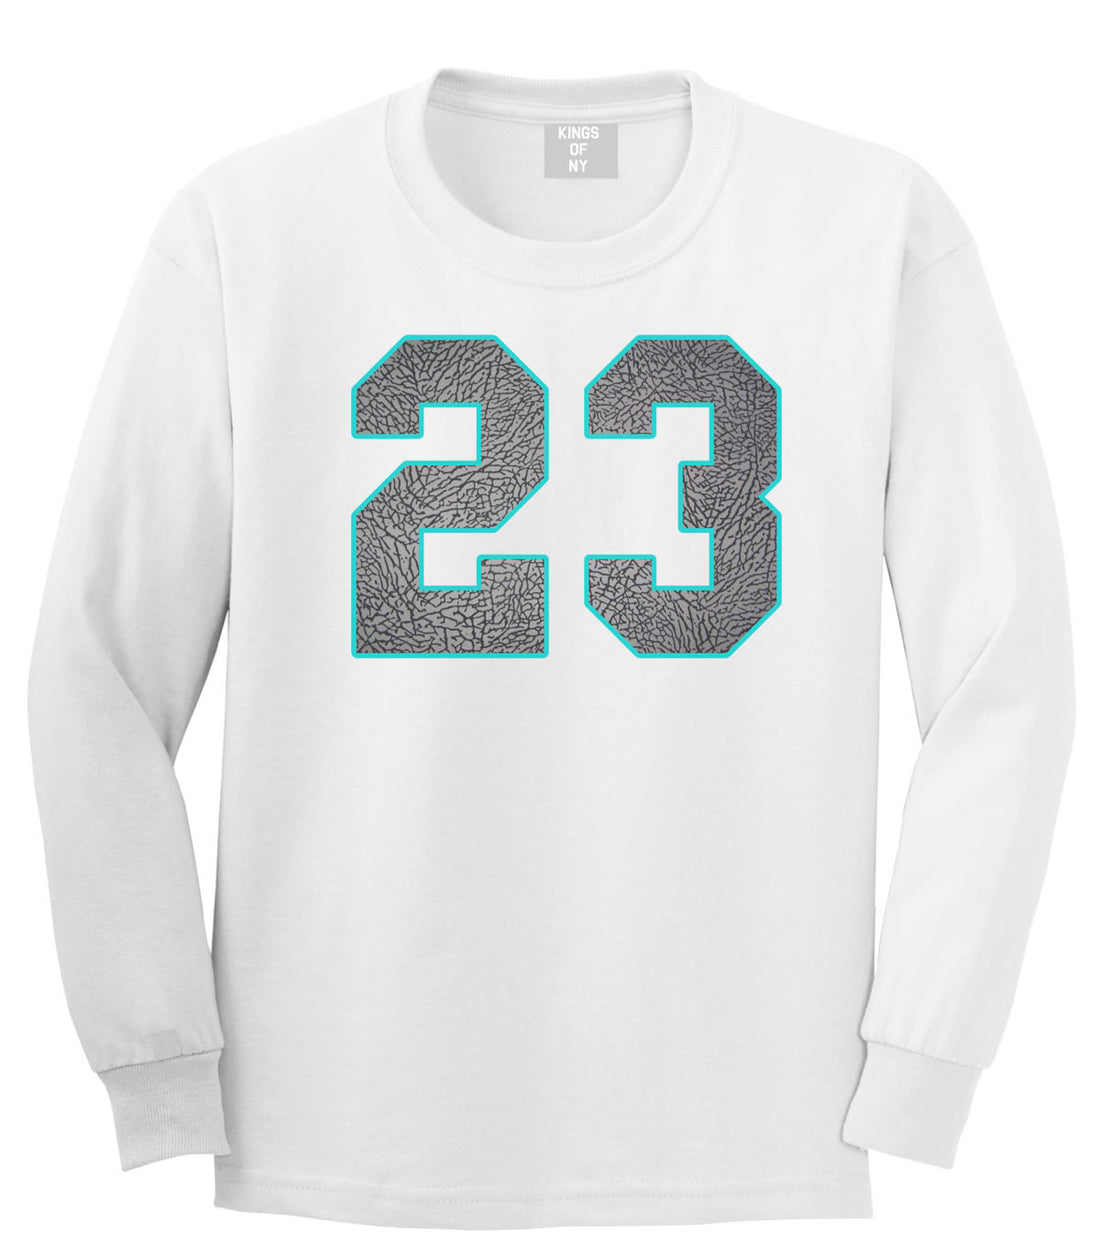 23 Cement Blue Jersey Long Sleeve T-Shirt in White By Kings Of NY